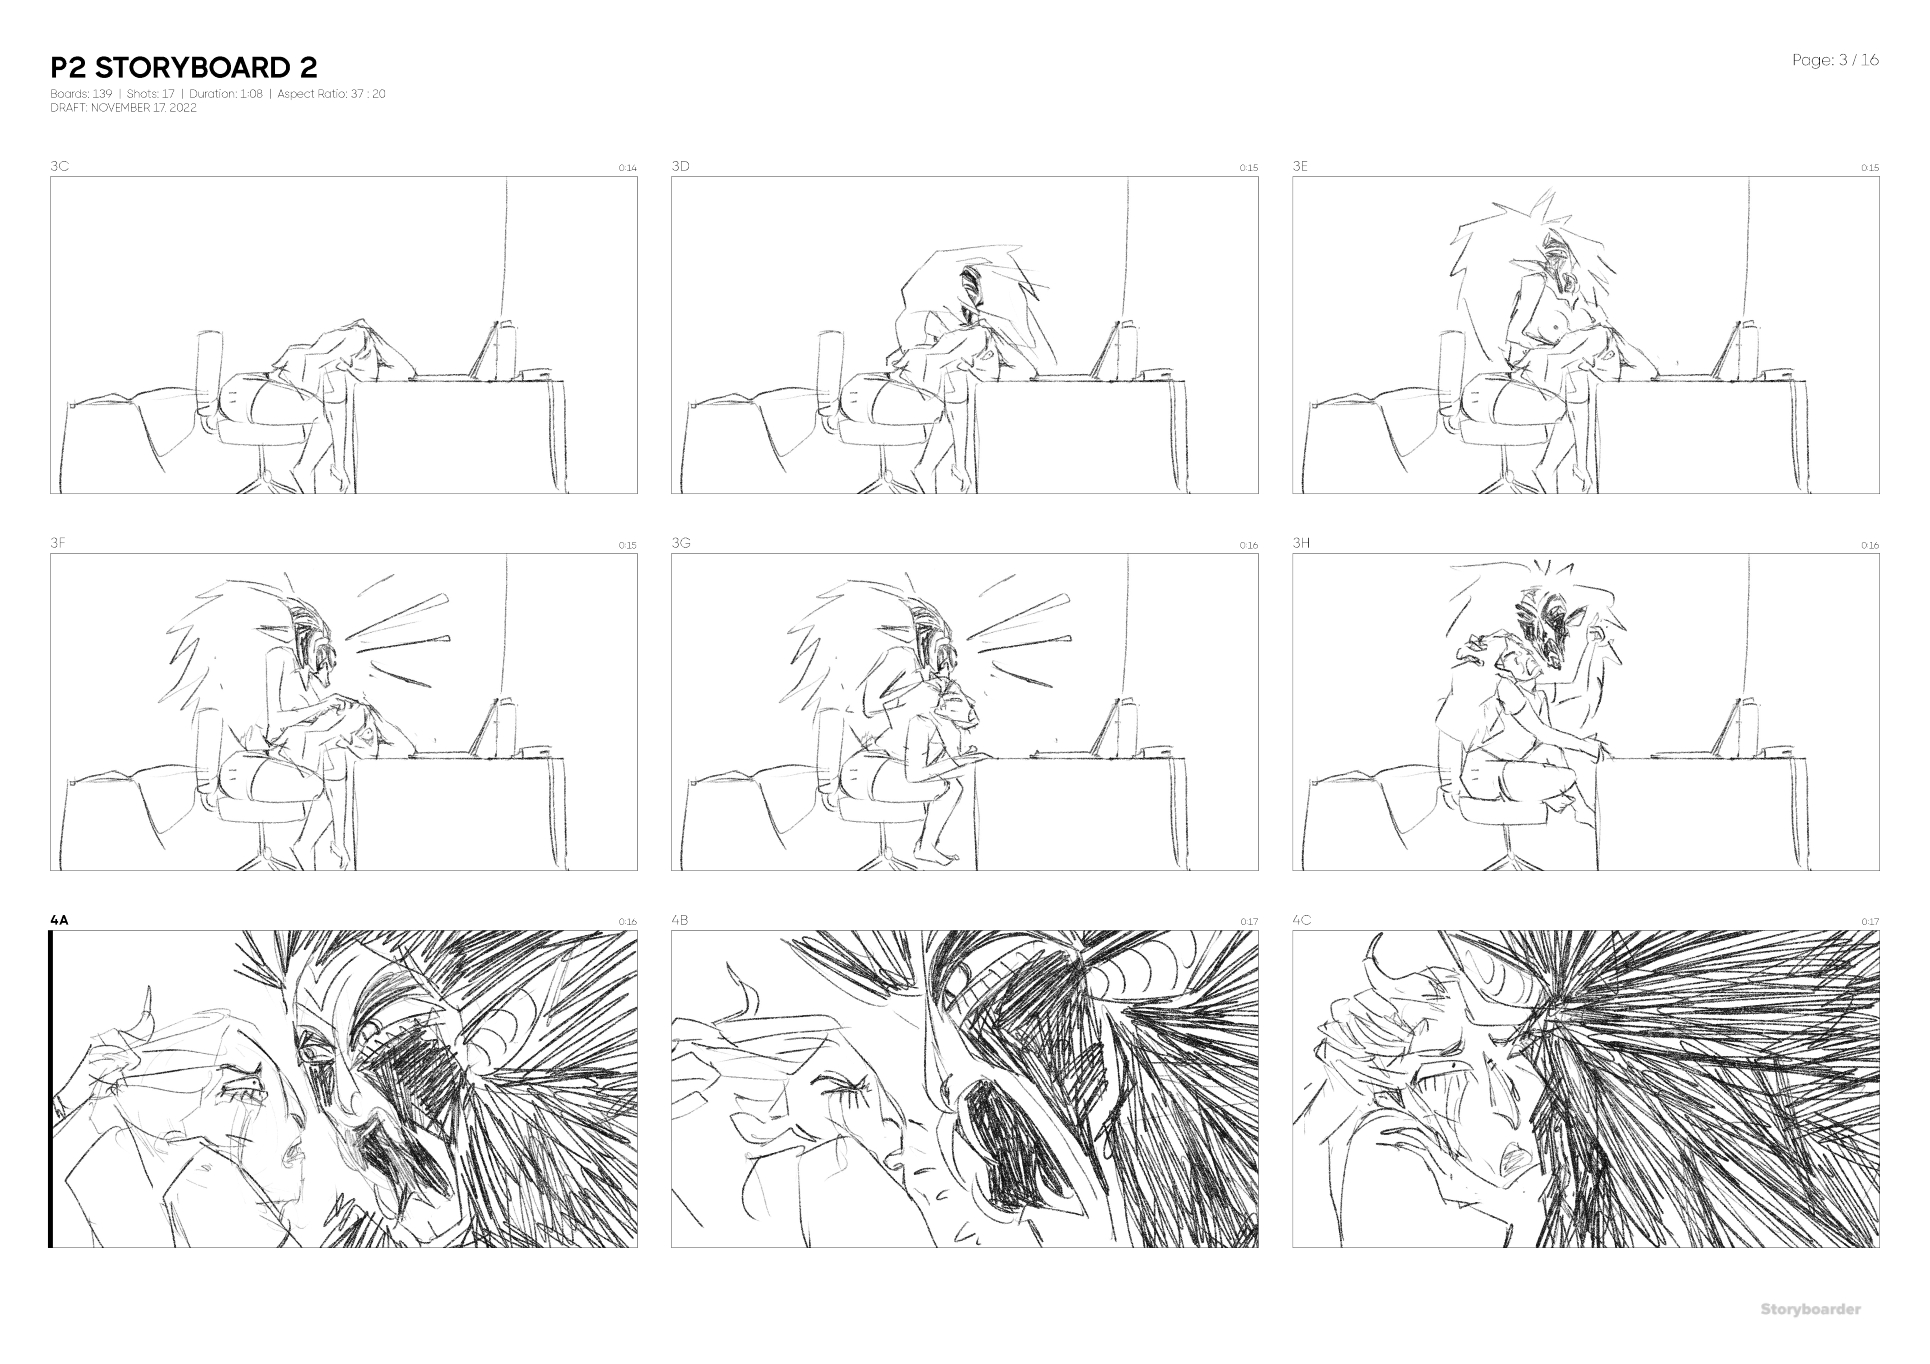 Snippets from the Storyboard